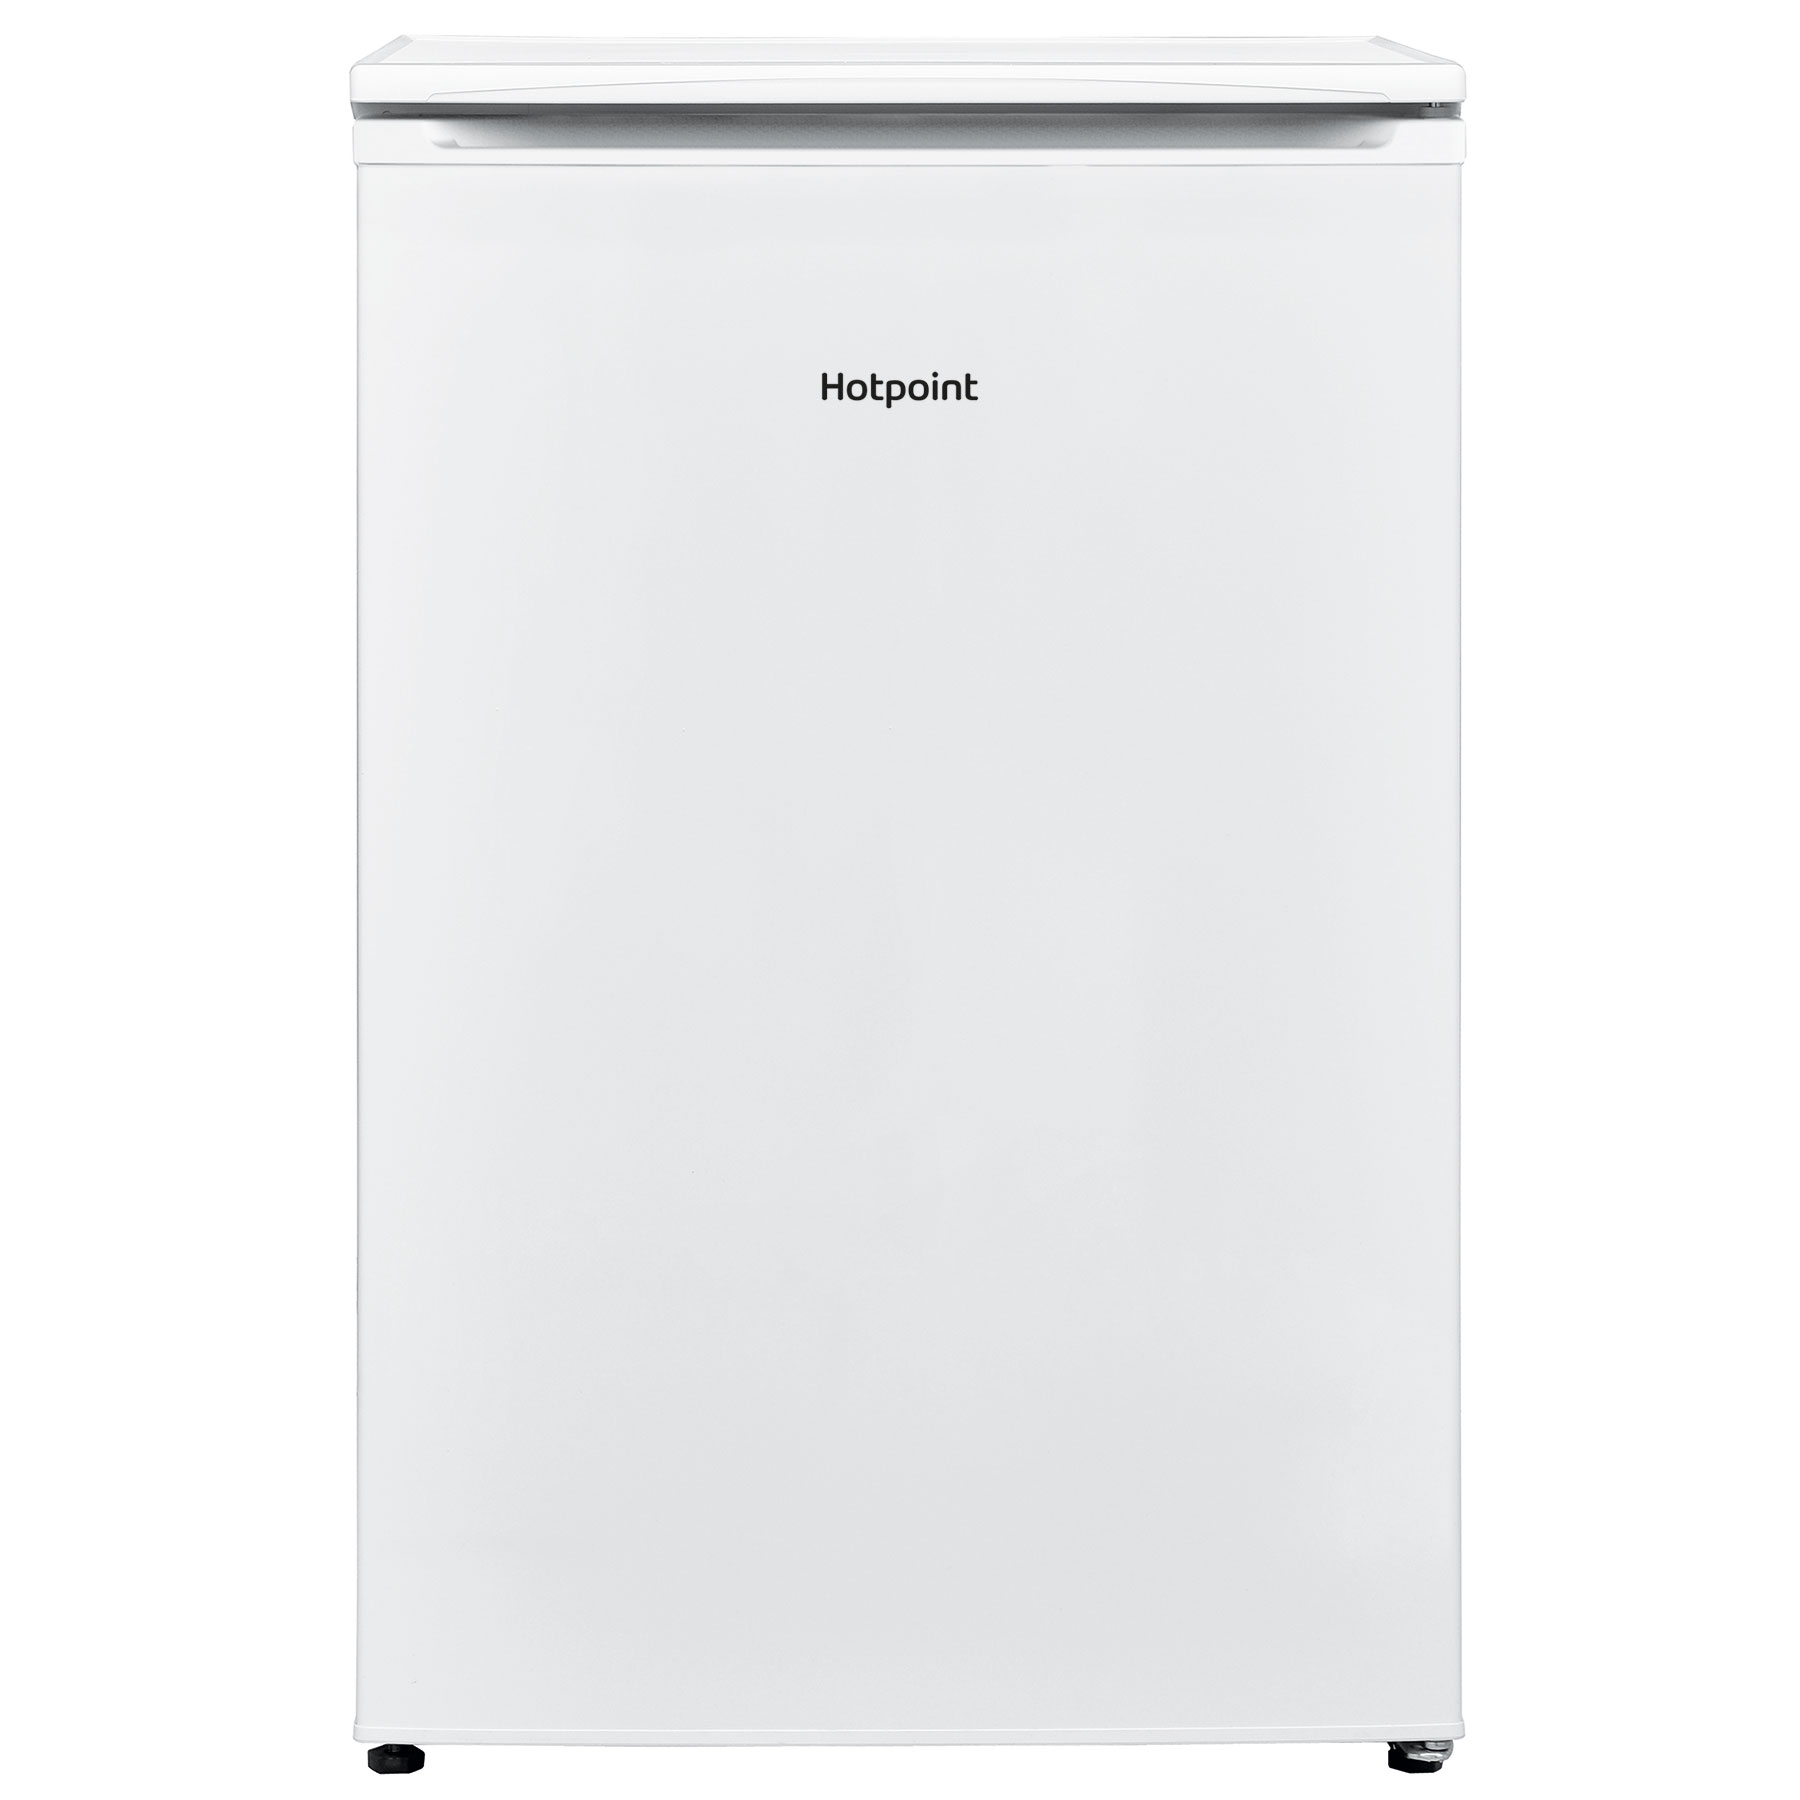 Image of Hotpoint H55ZM1120W 55cm Undercounter Freezer in White E Rated 103L